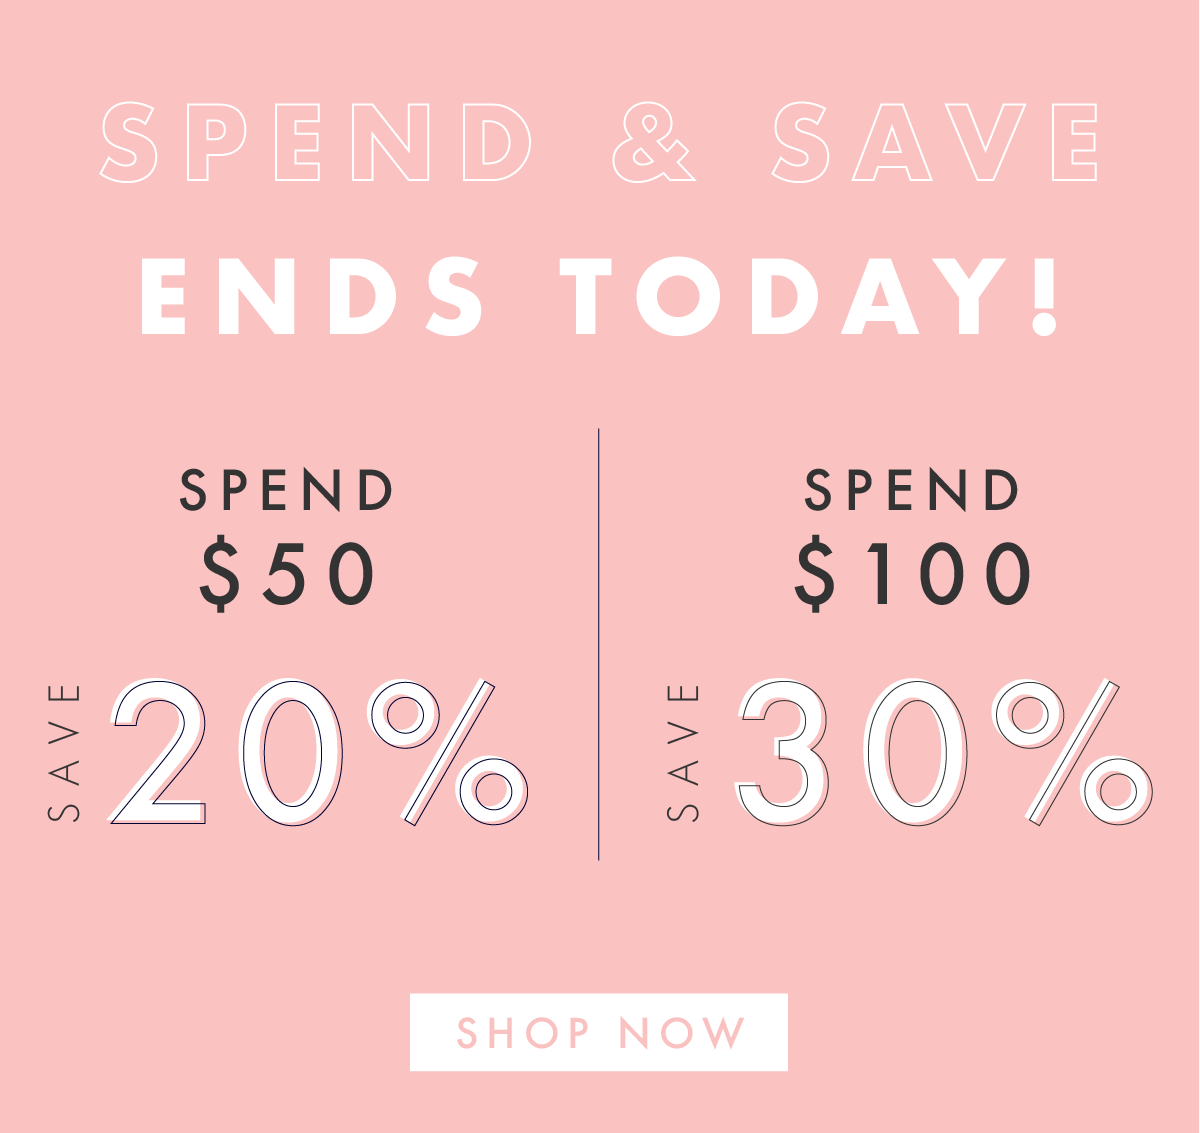 Spend and Save ends today! Spend $60 save 20%. Spend $120 save 30%.* Shop now. 